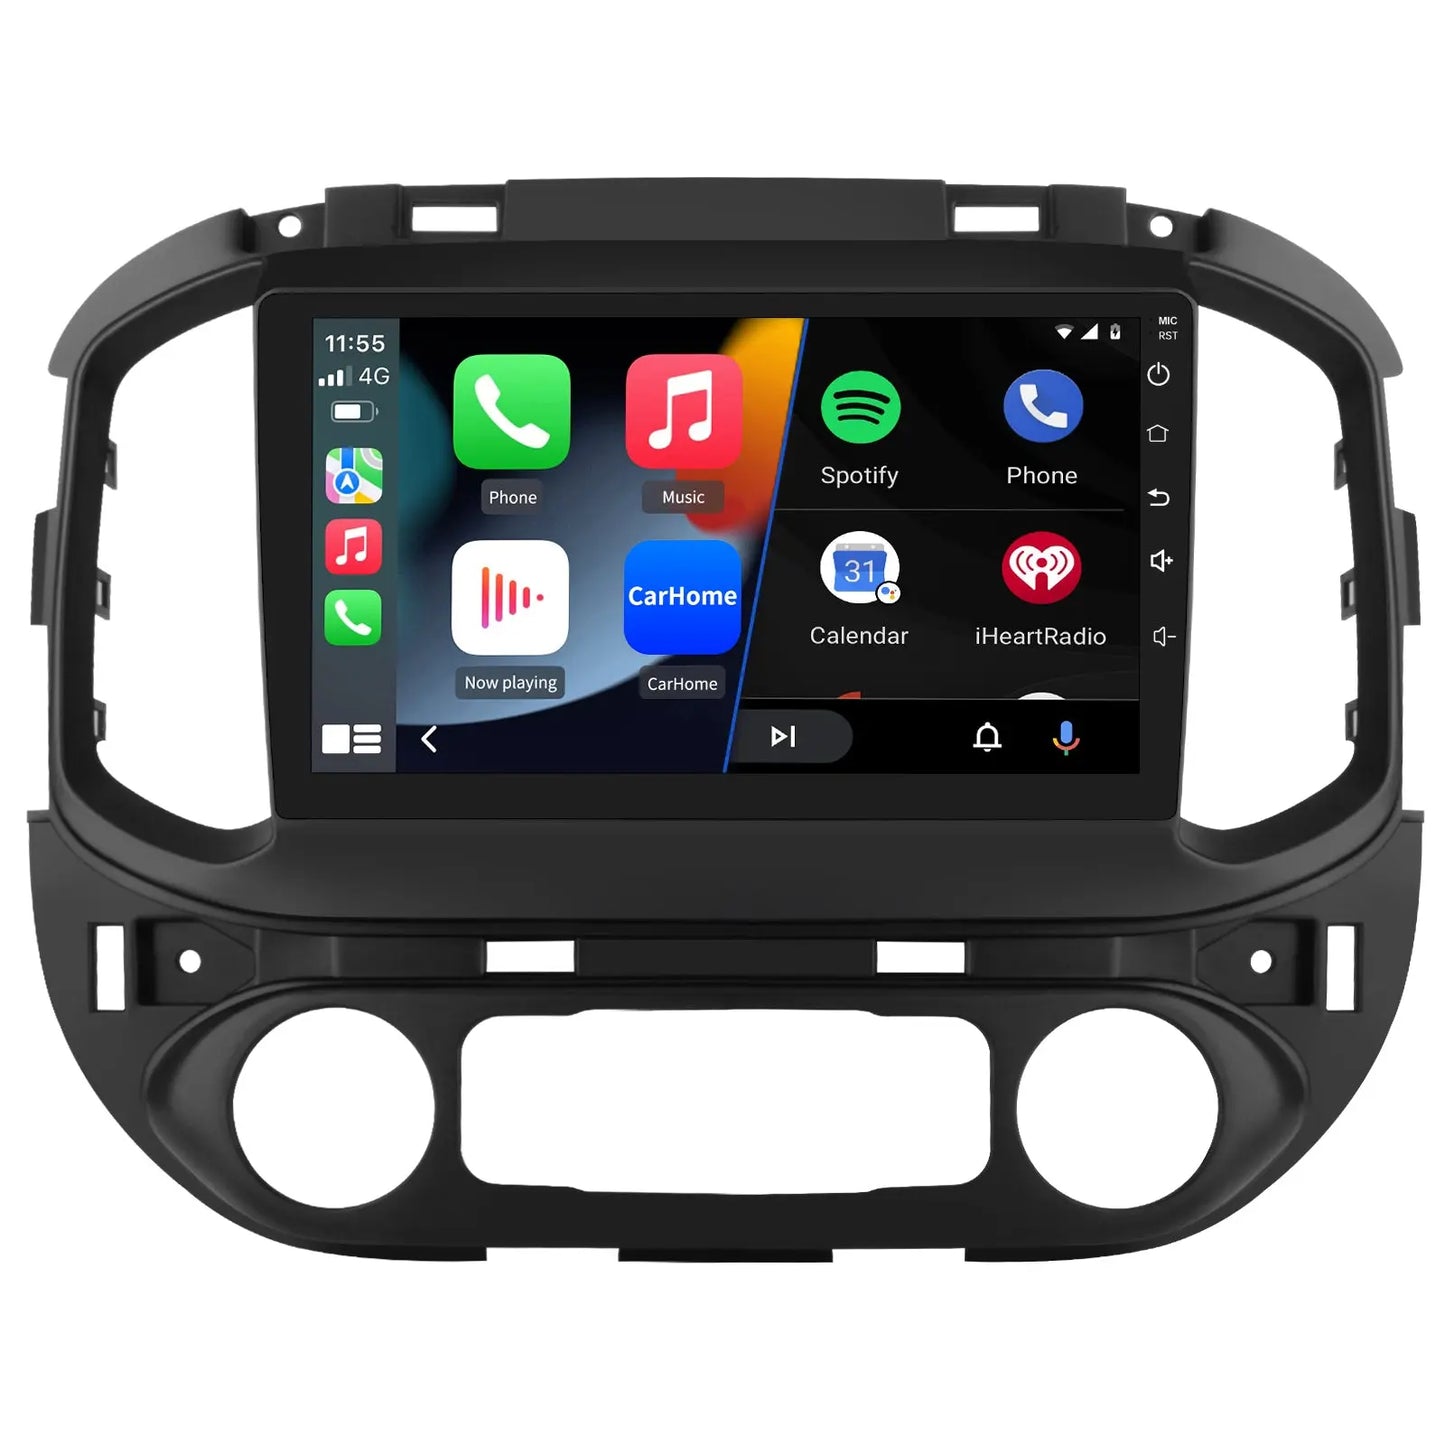 AWESAFE Android 12 [2GB+32GB] Car Radio Compatible for Chevrolet Colorado GMC Canyon 2015-2019, 9 Inch Touch Screen Car Stereo with Wireless CarPlay Android Auto, FM/RDS/GPS/WiFi/USB/SWC/BT Function AWESAFE